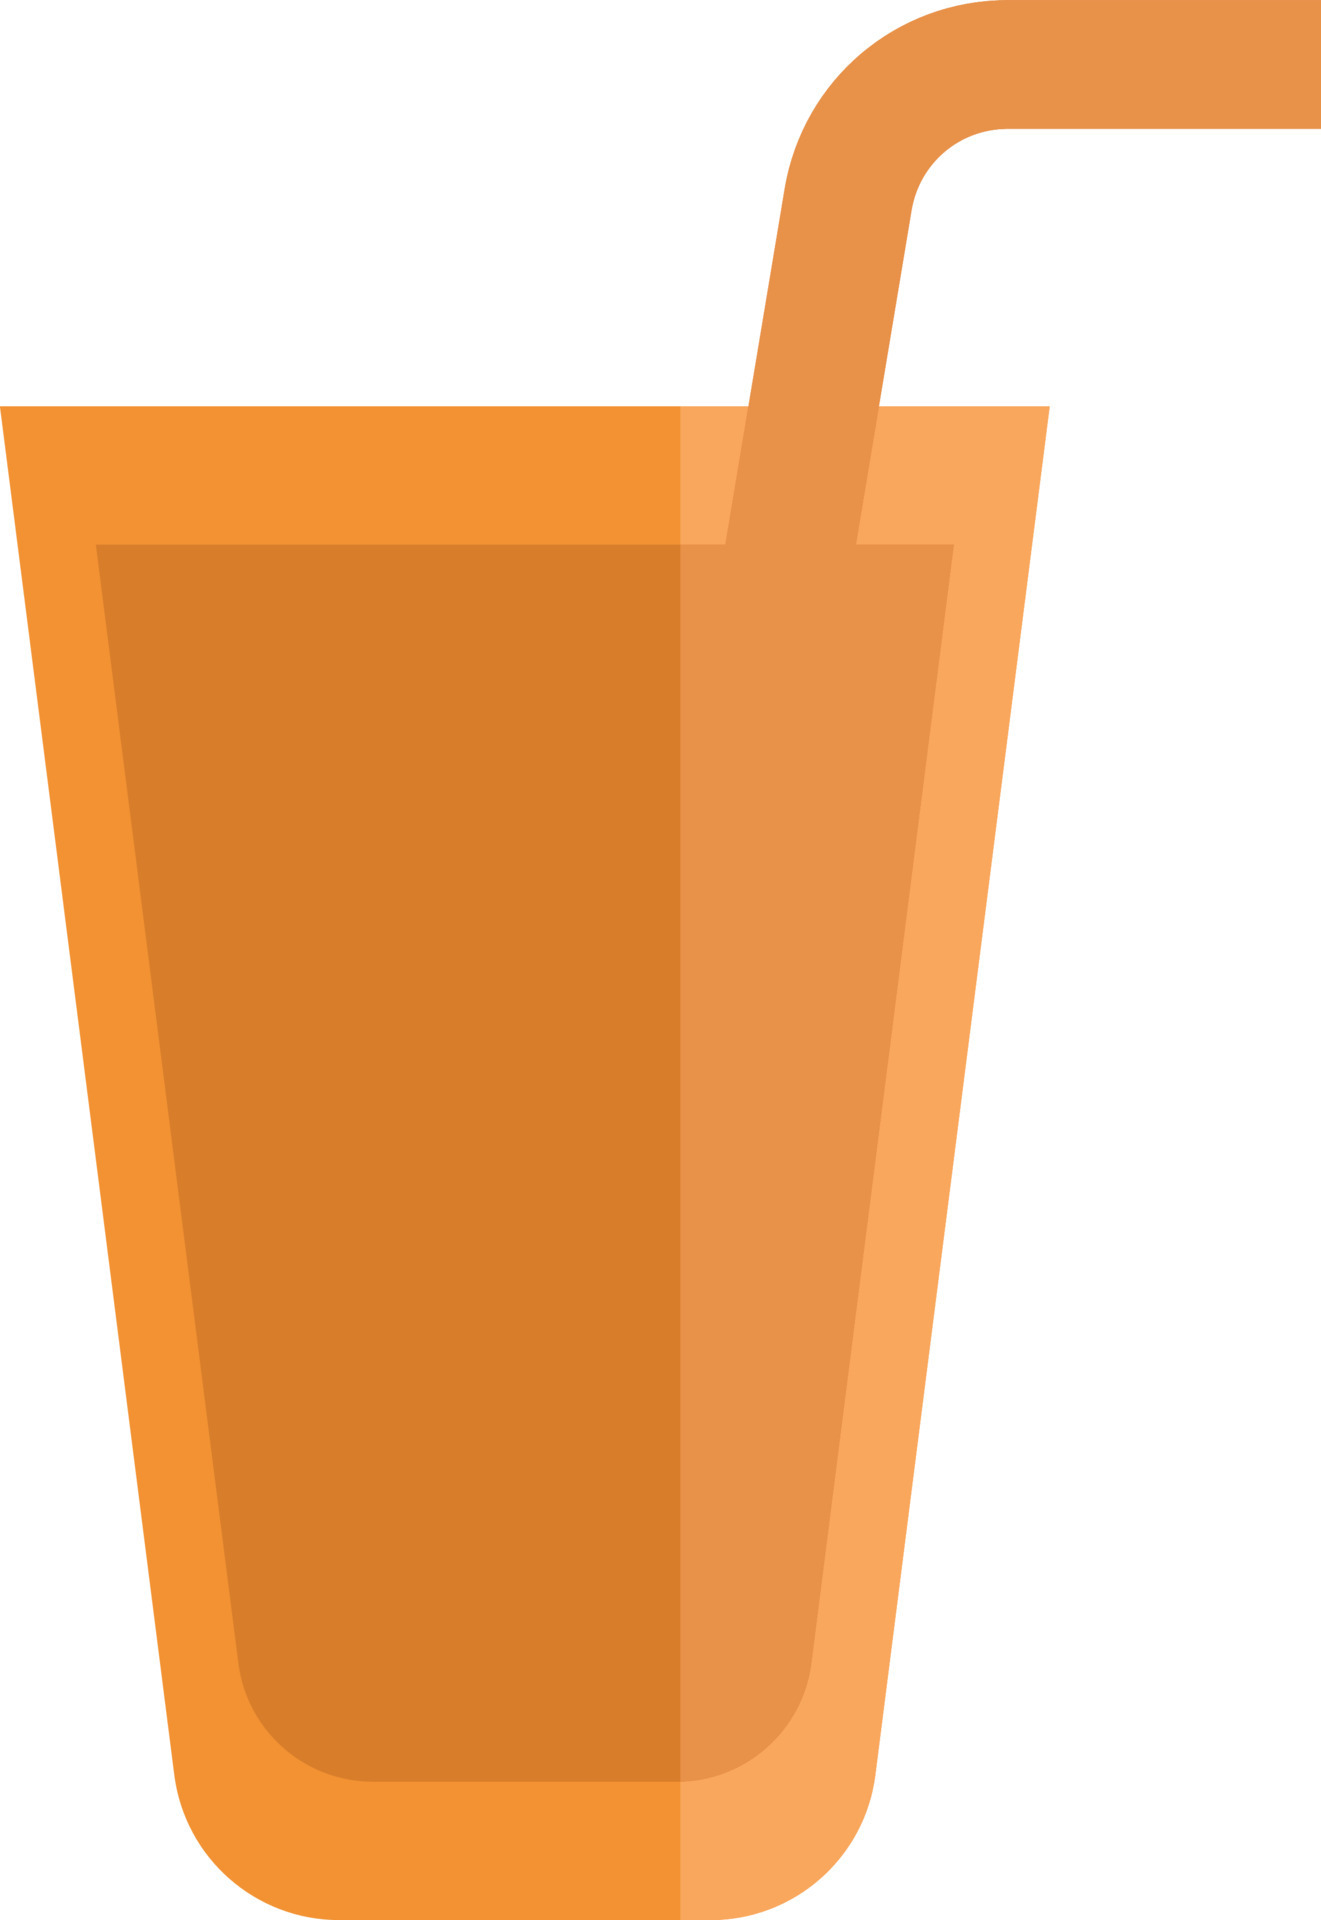 https://static.vecteezy.com/system/resources/previews/013/779/991/original/orange-juice-in-glass-cup-illustration-on-a-white-background-free-vector.jpg